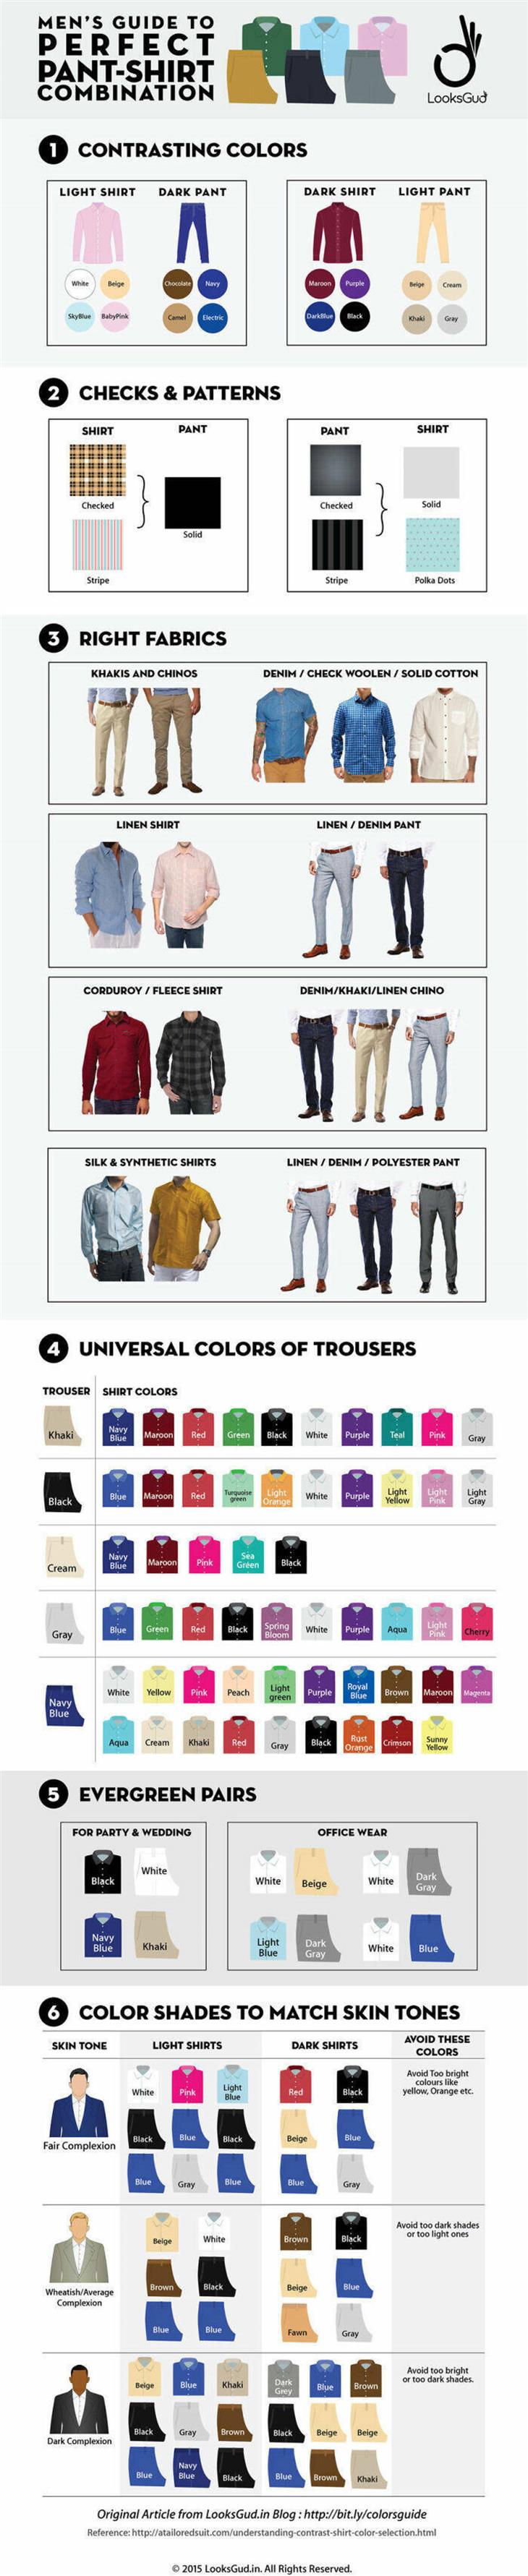 Clothing and Laundry Guide pant-shirt combinations